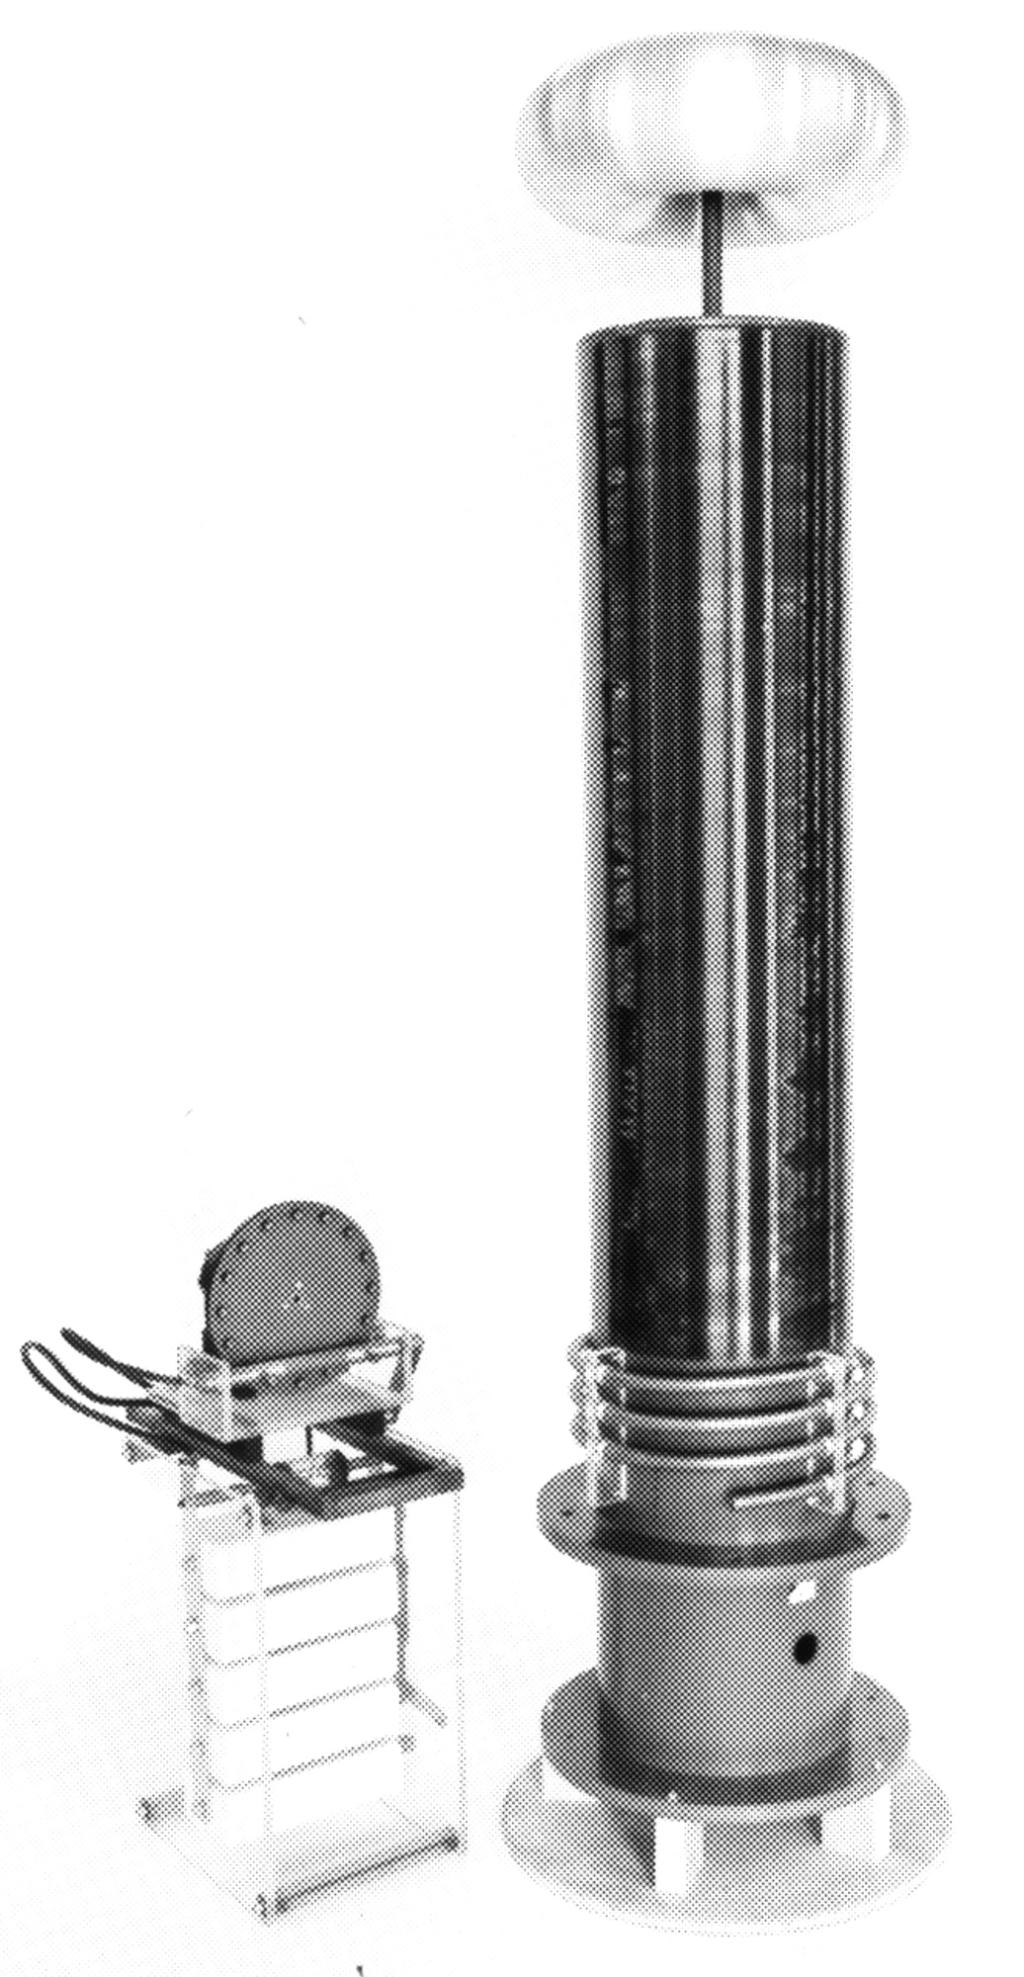 Ed Angell's large Tesla coil